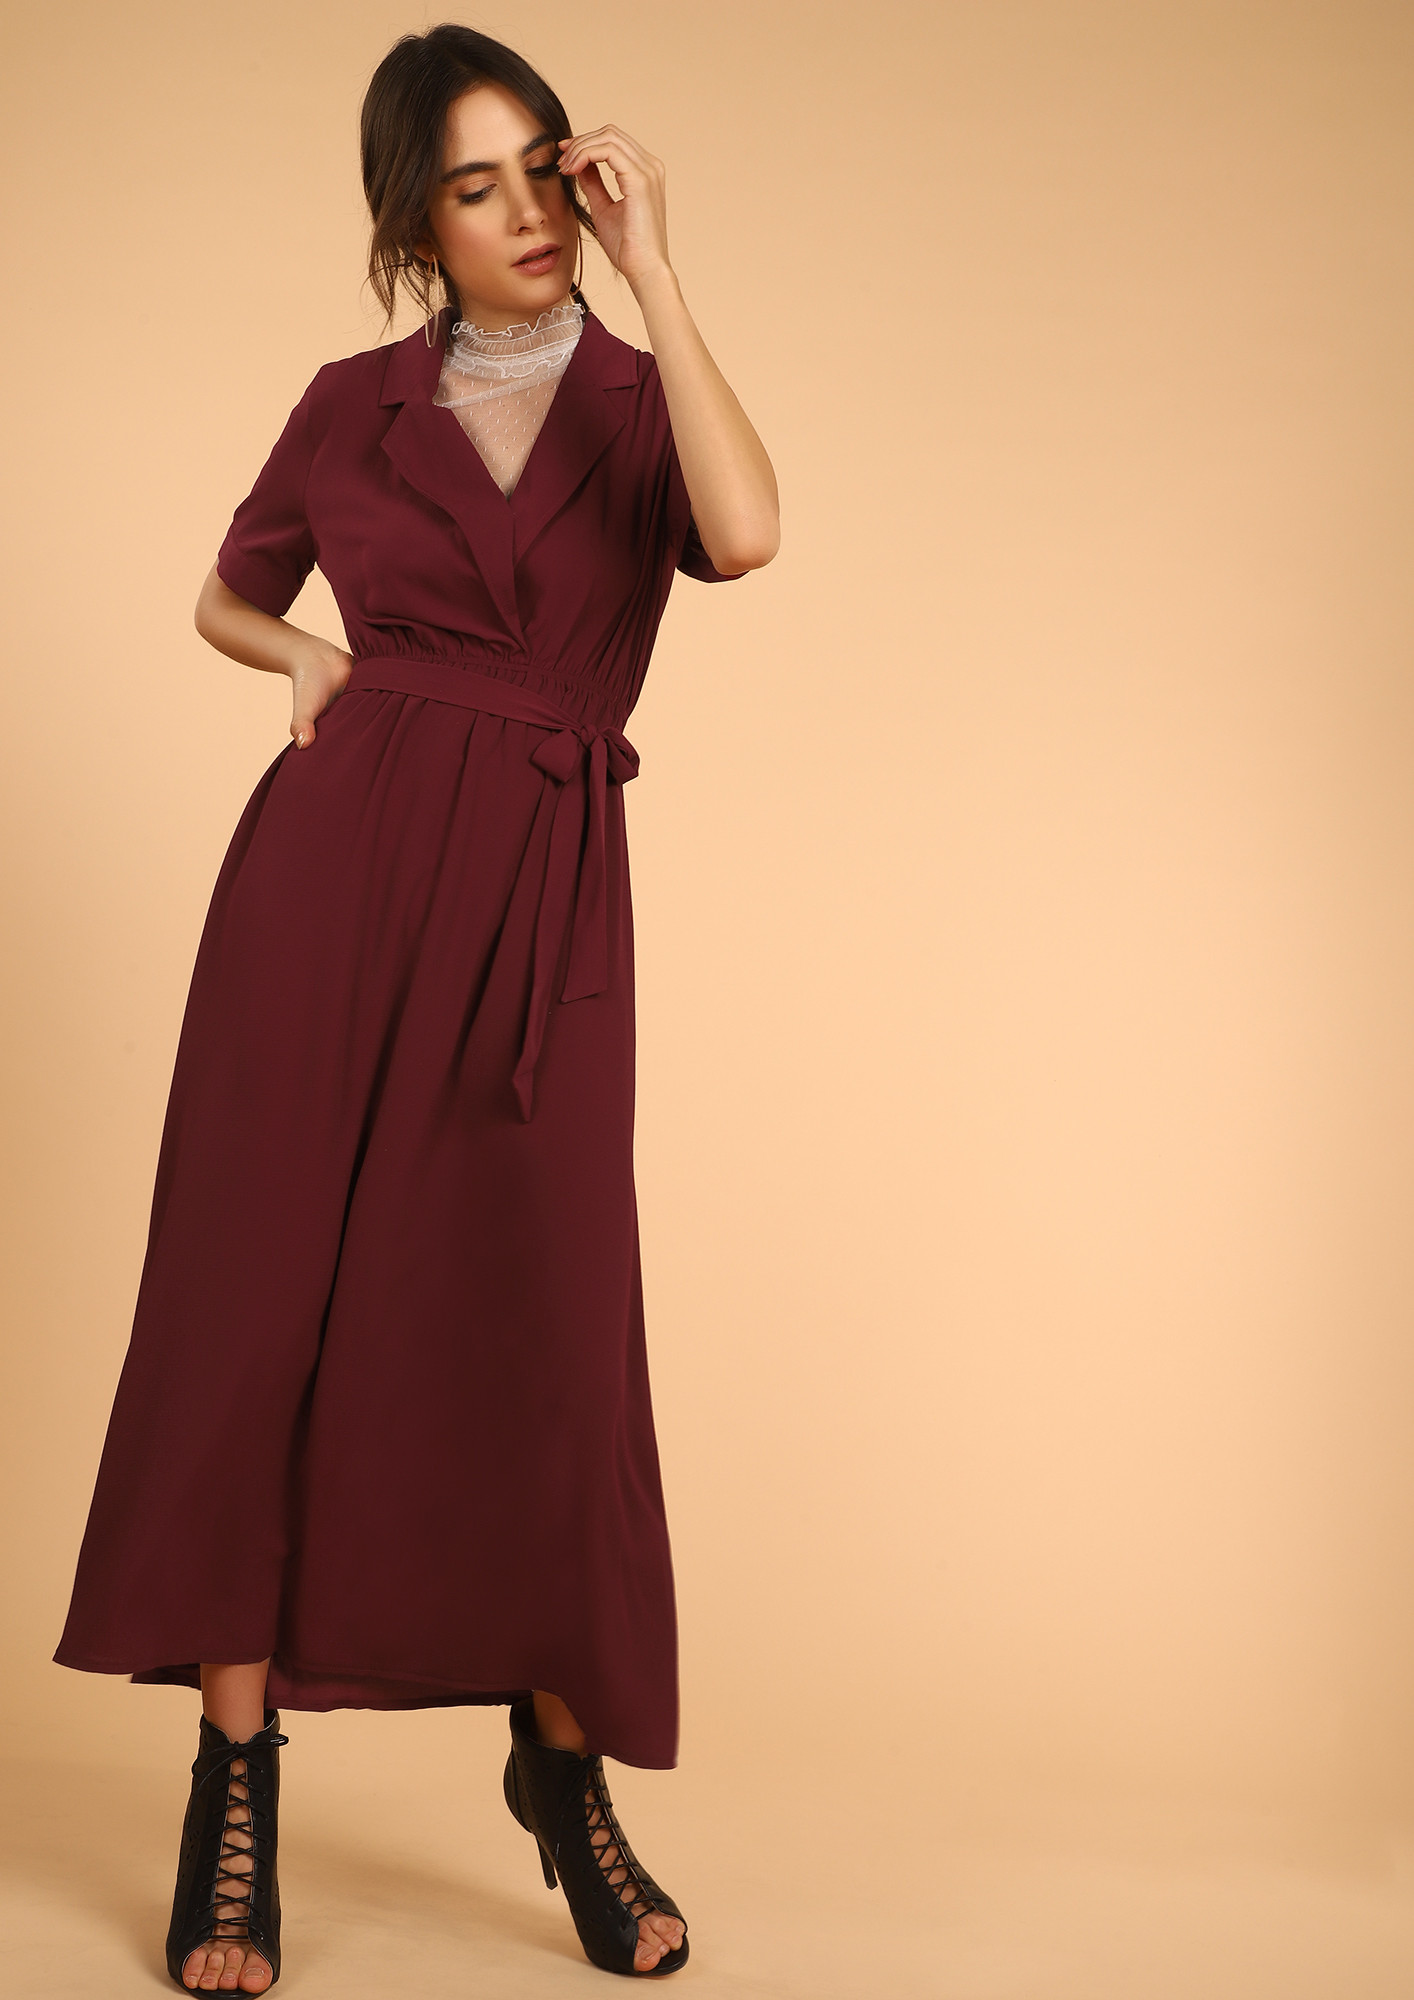 GONNA GET GOING MARSALA RED MAXI DRESS